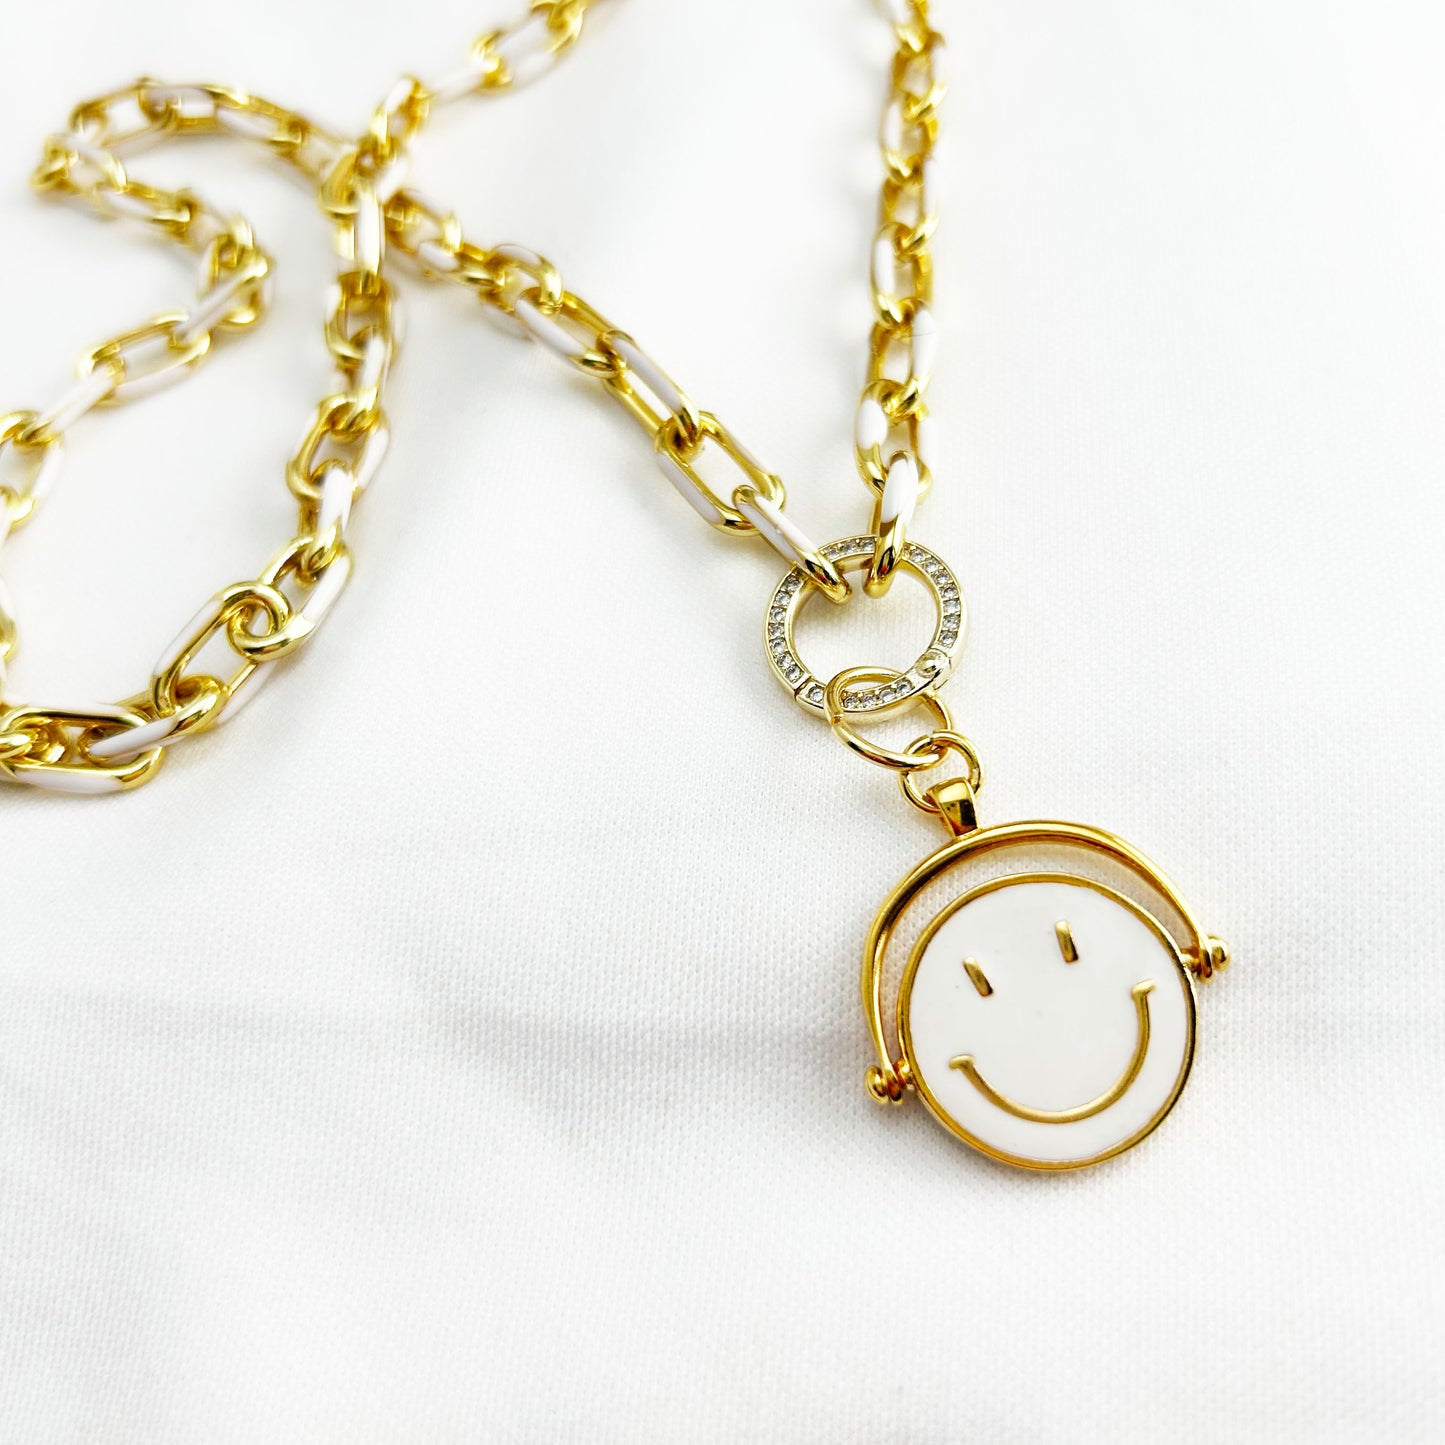 Smiley Face Necklace | Happy Sad Spinner